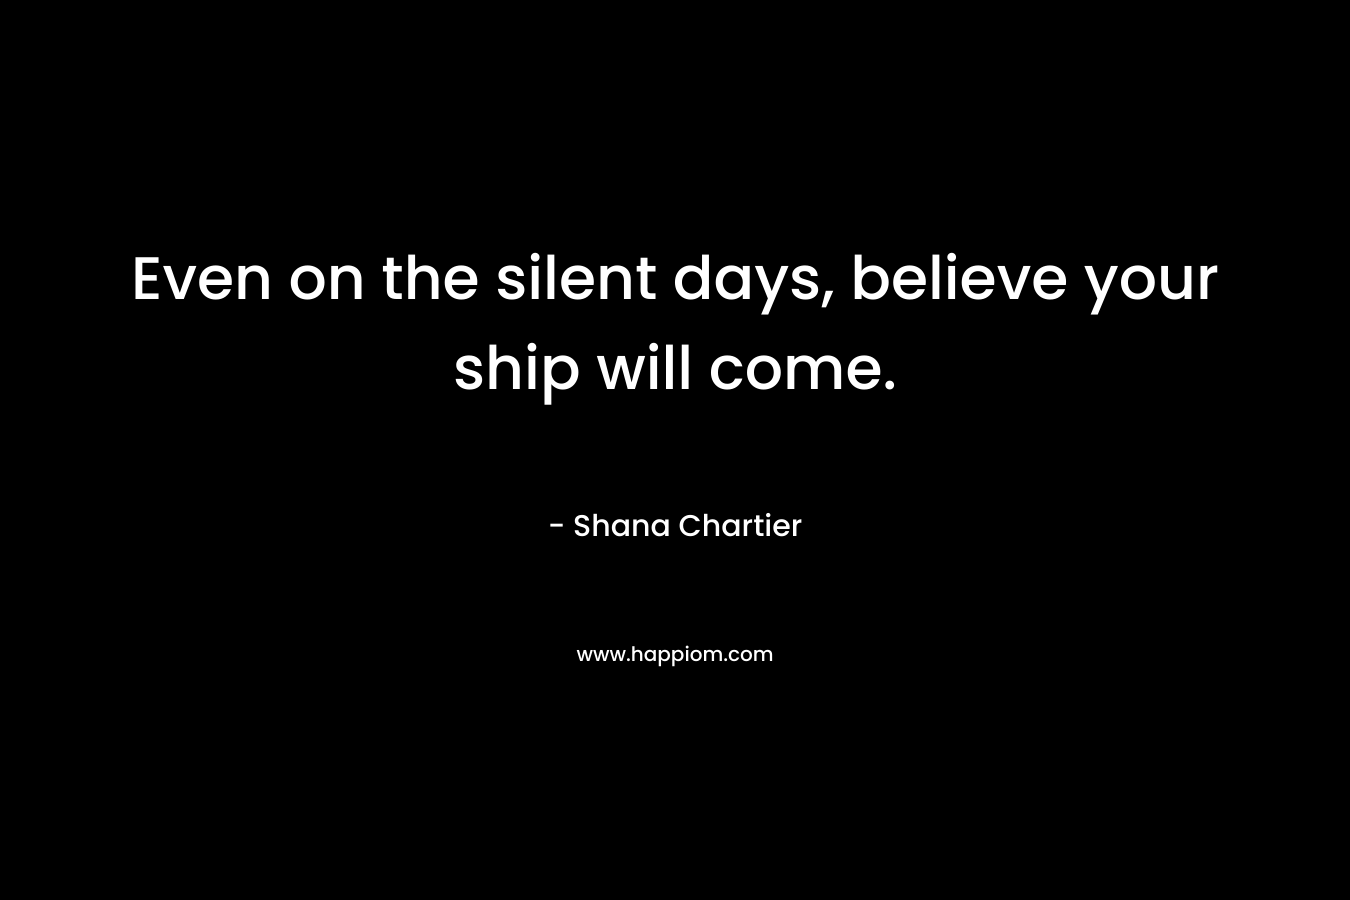 Even on the silent days, believe your ship will come.